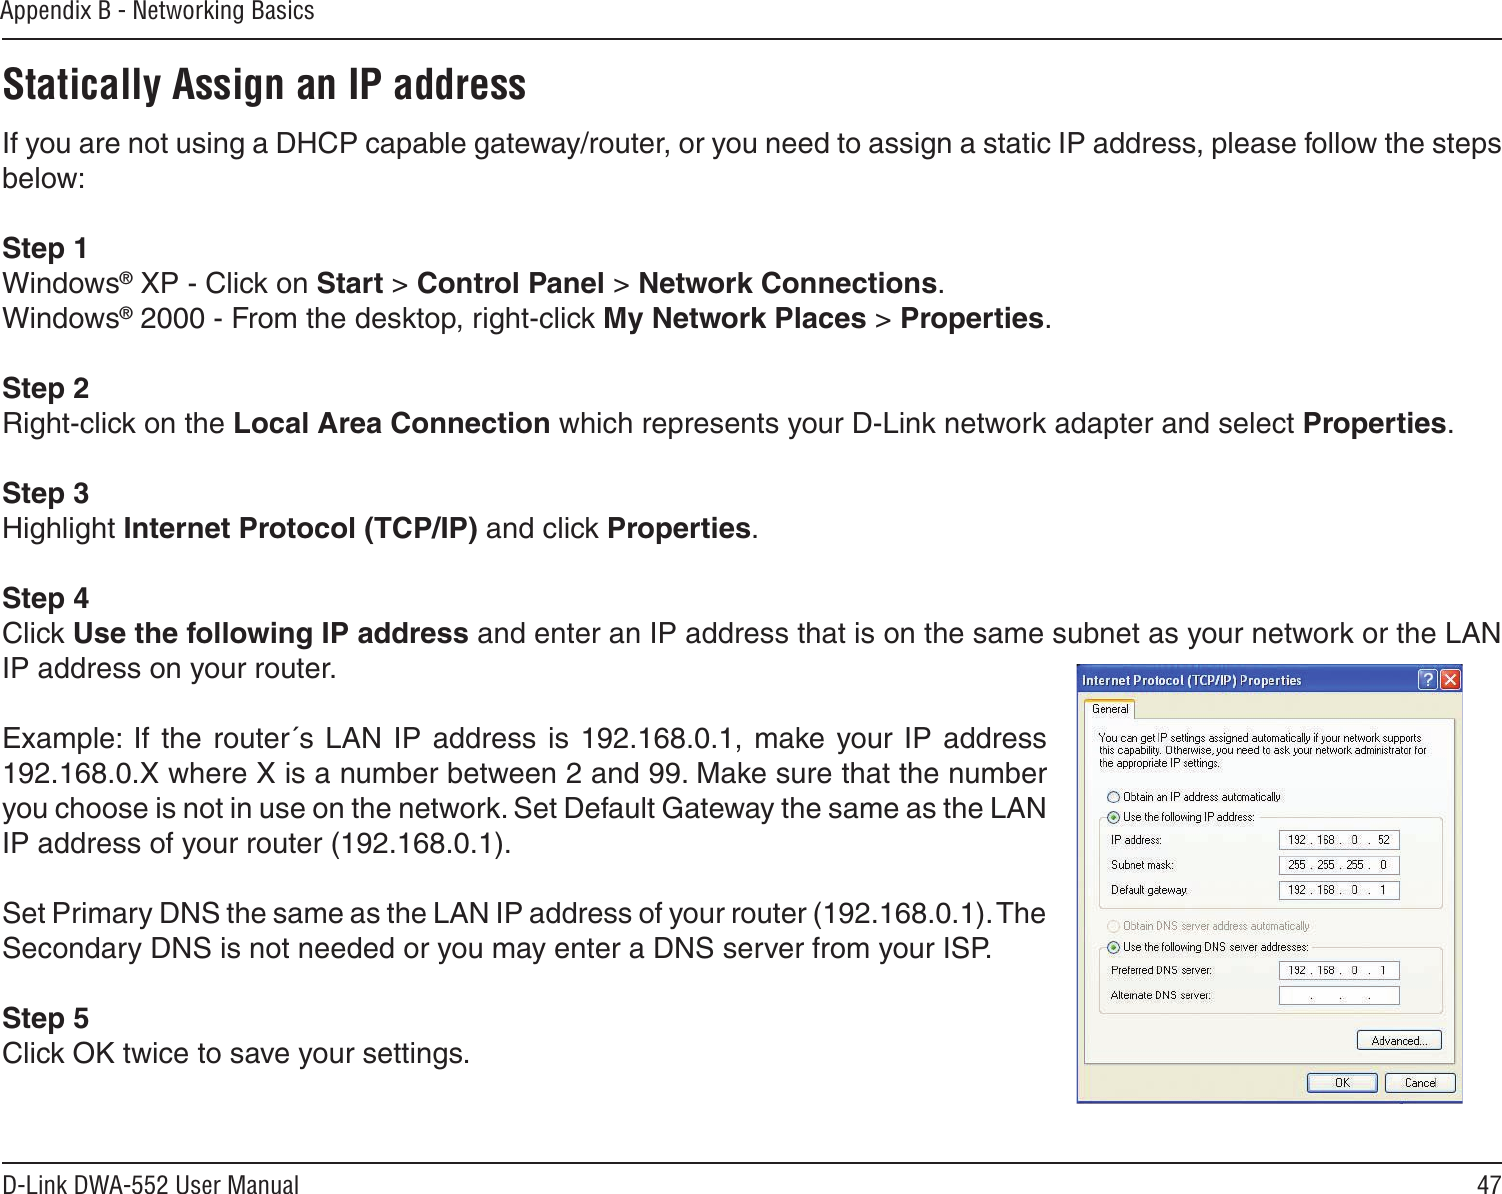 47D-Link DWA-552 User ManualAppendix B - Networking BasicsStatically Assign an IP addressIf you are not using a DHCP capable gateway/router, or you need to assign a static IP address, please follow the steps below:Step 1Windows® XP - Click on Start &gt; Control Panel &gt; Network Connections.Windows® 2000 - From the desktop, right-click My Network Places &gt; Properties.Step 2Right-click on the Local Area Connection which represents your D-Link network adapter and select Properties.Step 3Highlight Internet Protocol (TCP/IP) and click Properties.Step 4Click Use the following IP address and enter an IP address that is on the same subnet as your network or the LAN IP address on your router. Example:  If  the  router´s LAN IP  address  is  192.168.0.1,  make your IP address 192.168.0.X where X is a number between 2 and 99. Make sure that the number you choose is not in use on the network. Set Default Gateway the same as the LAN IP address of your router (192.168.0.1). Set Primary DNS the same as the LAN IP address of your router (192.168.0.1). The Secondary DNS is not needed or you may enter a DNS server from your ISP.Step 5Click OK twice to save your settings.